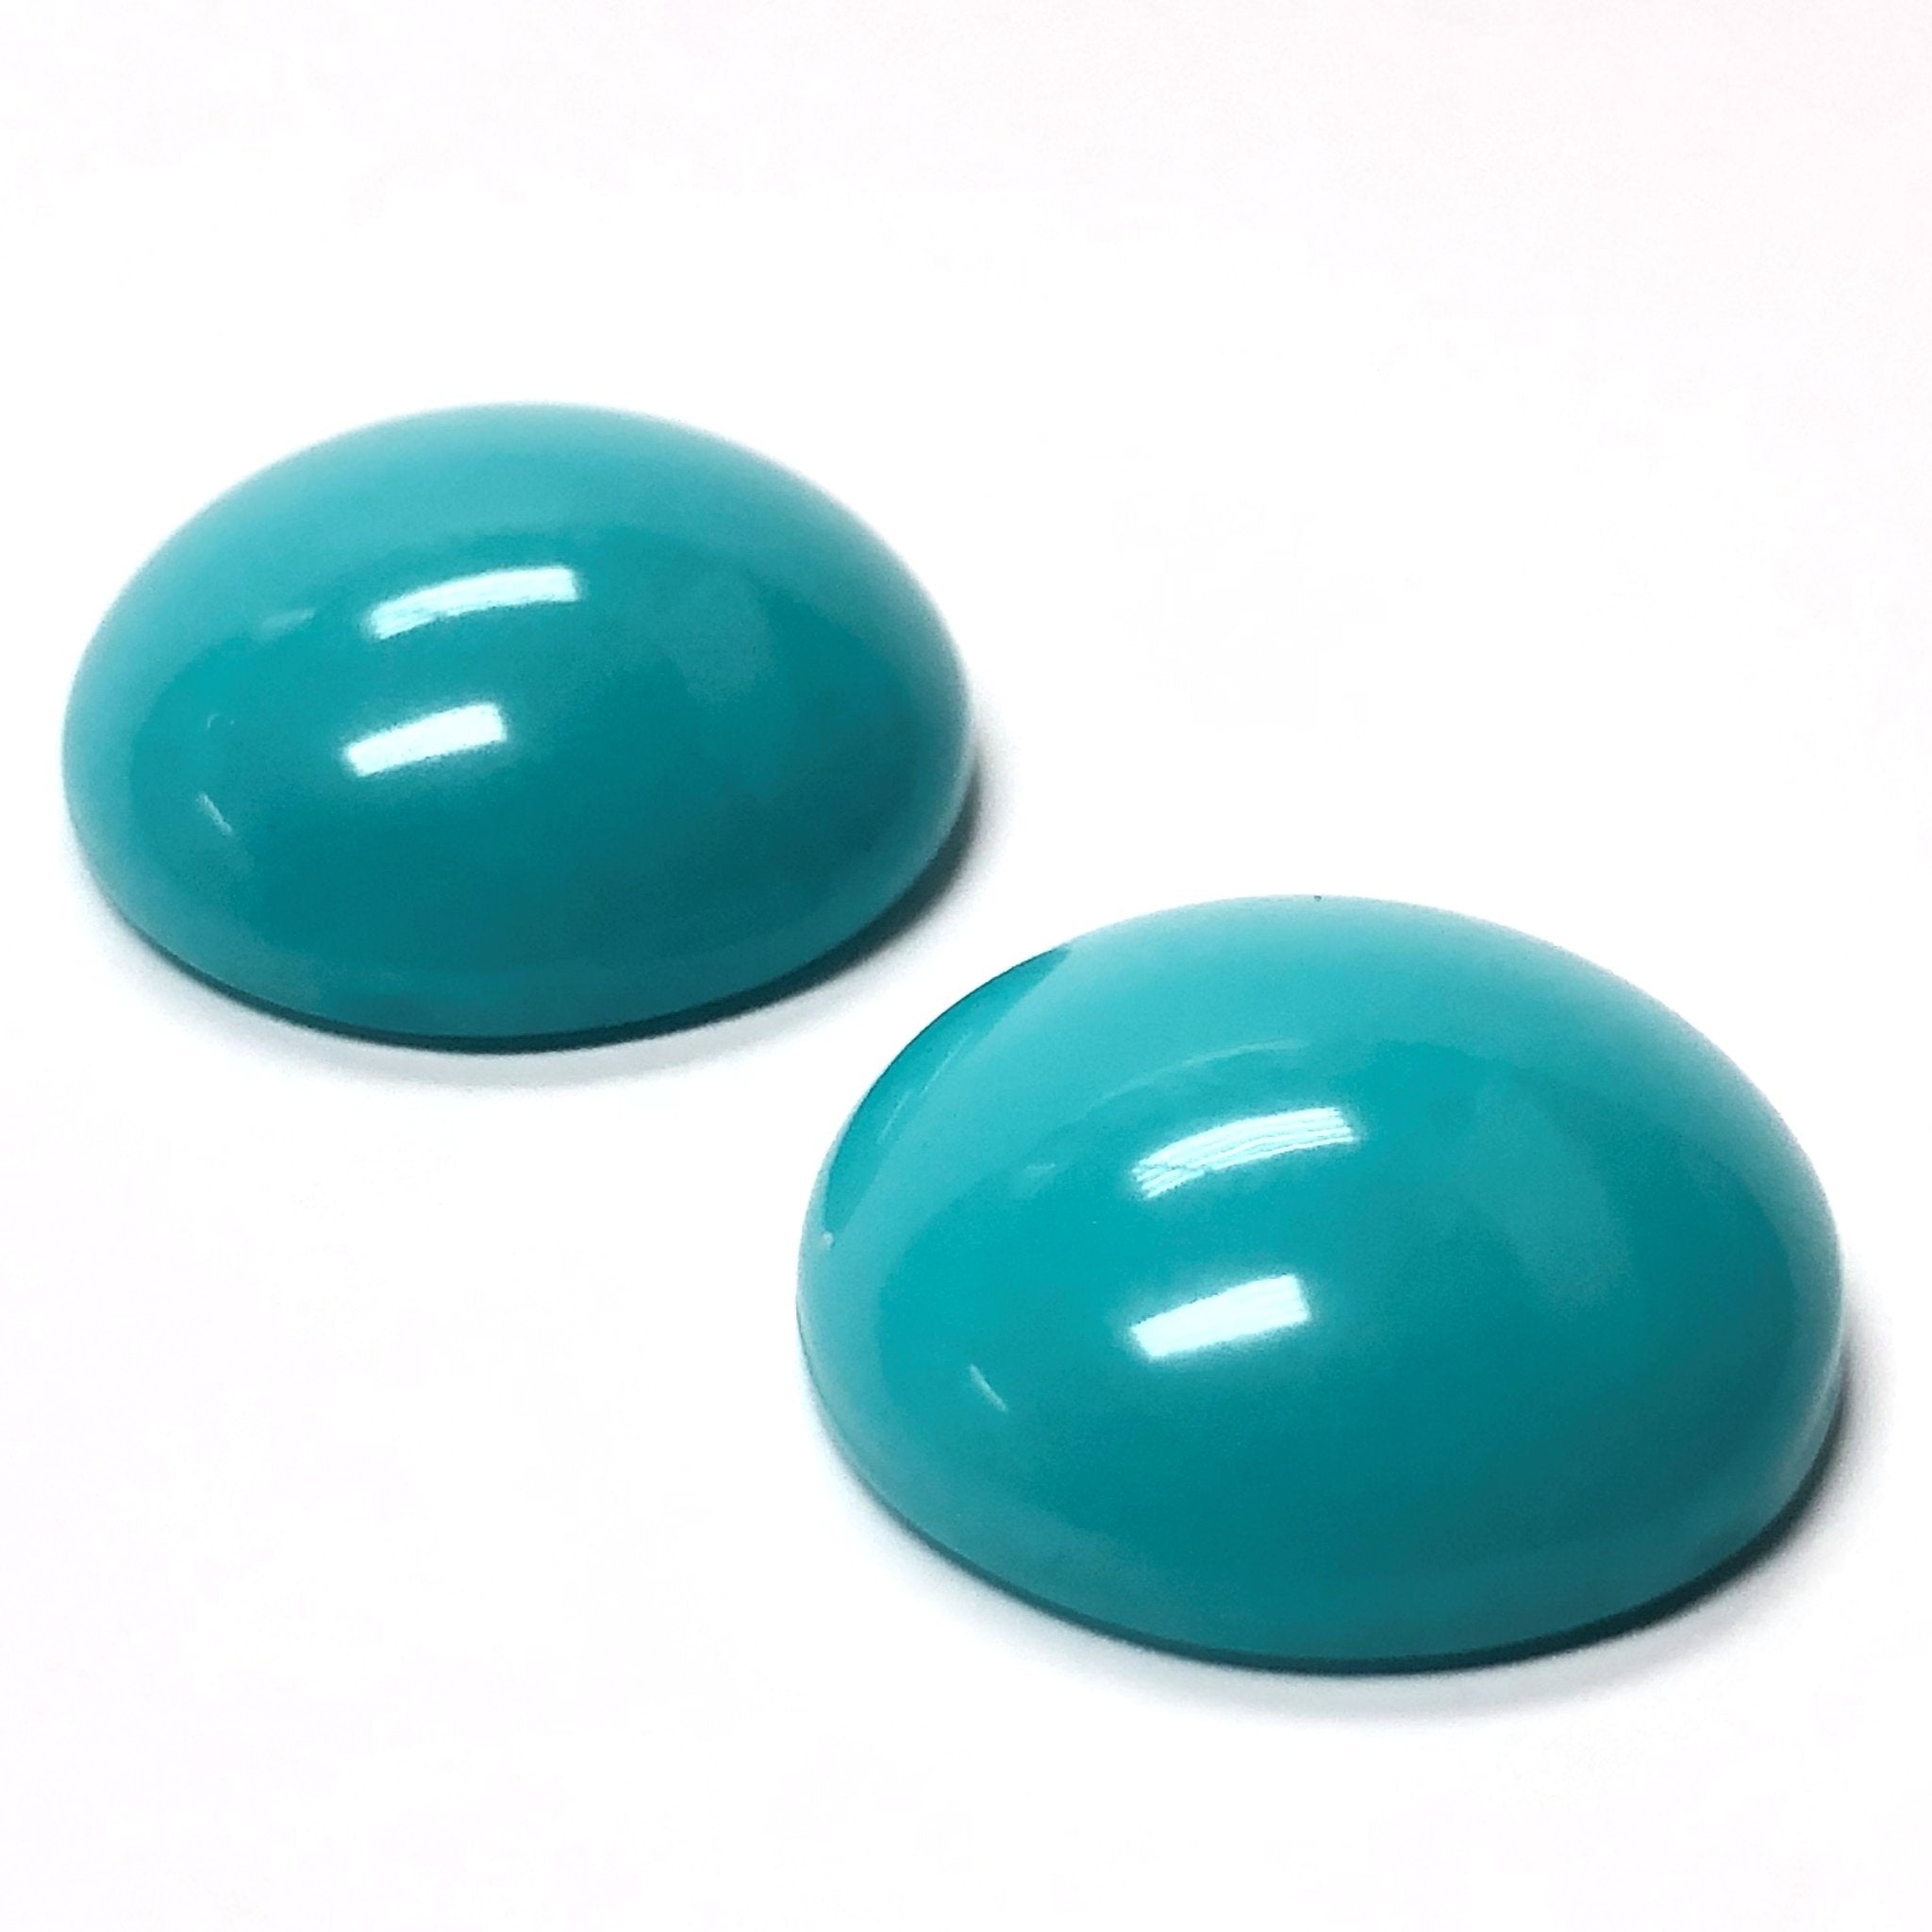 12MM Blue Turquoise Round Acrylic Cab (72 pieces)